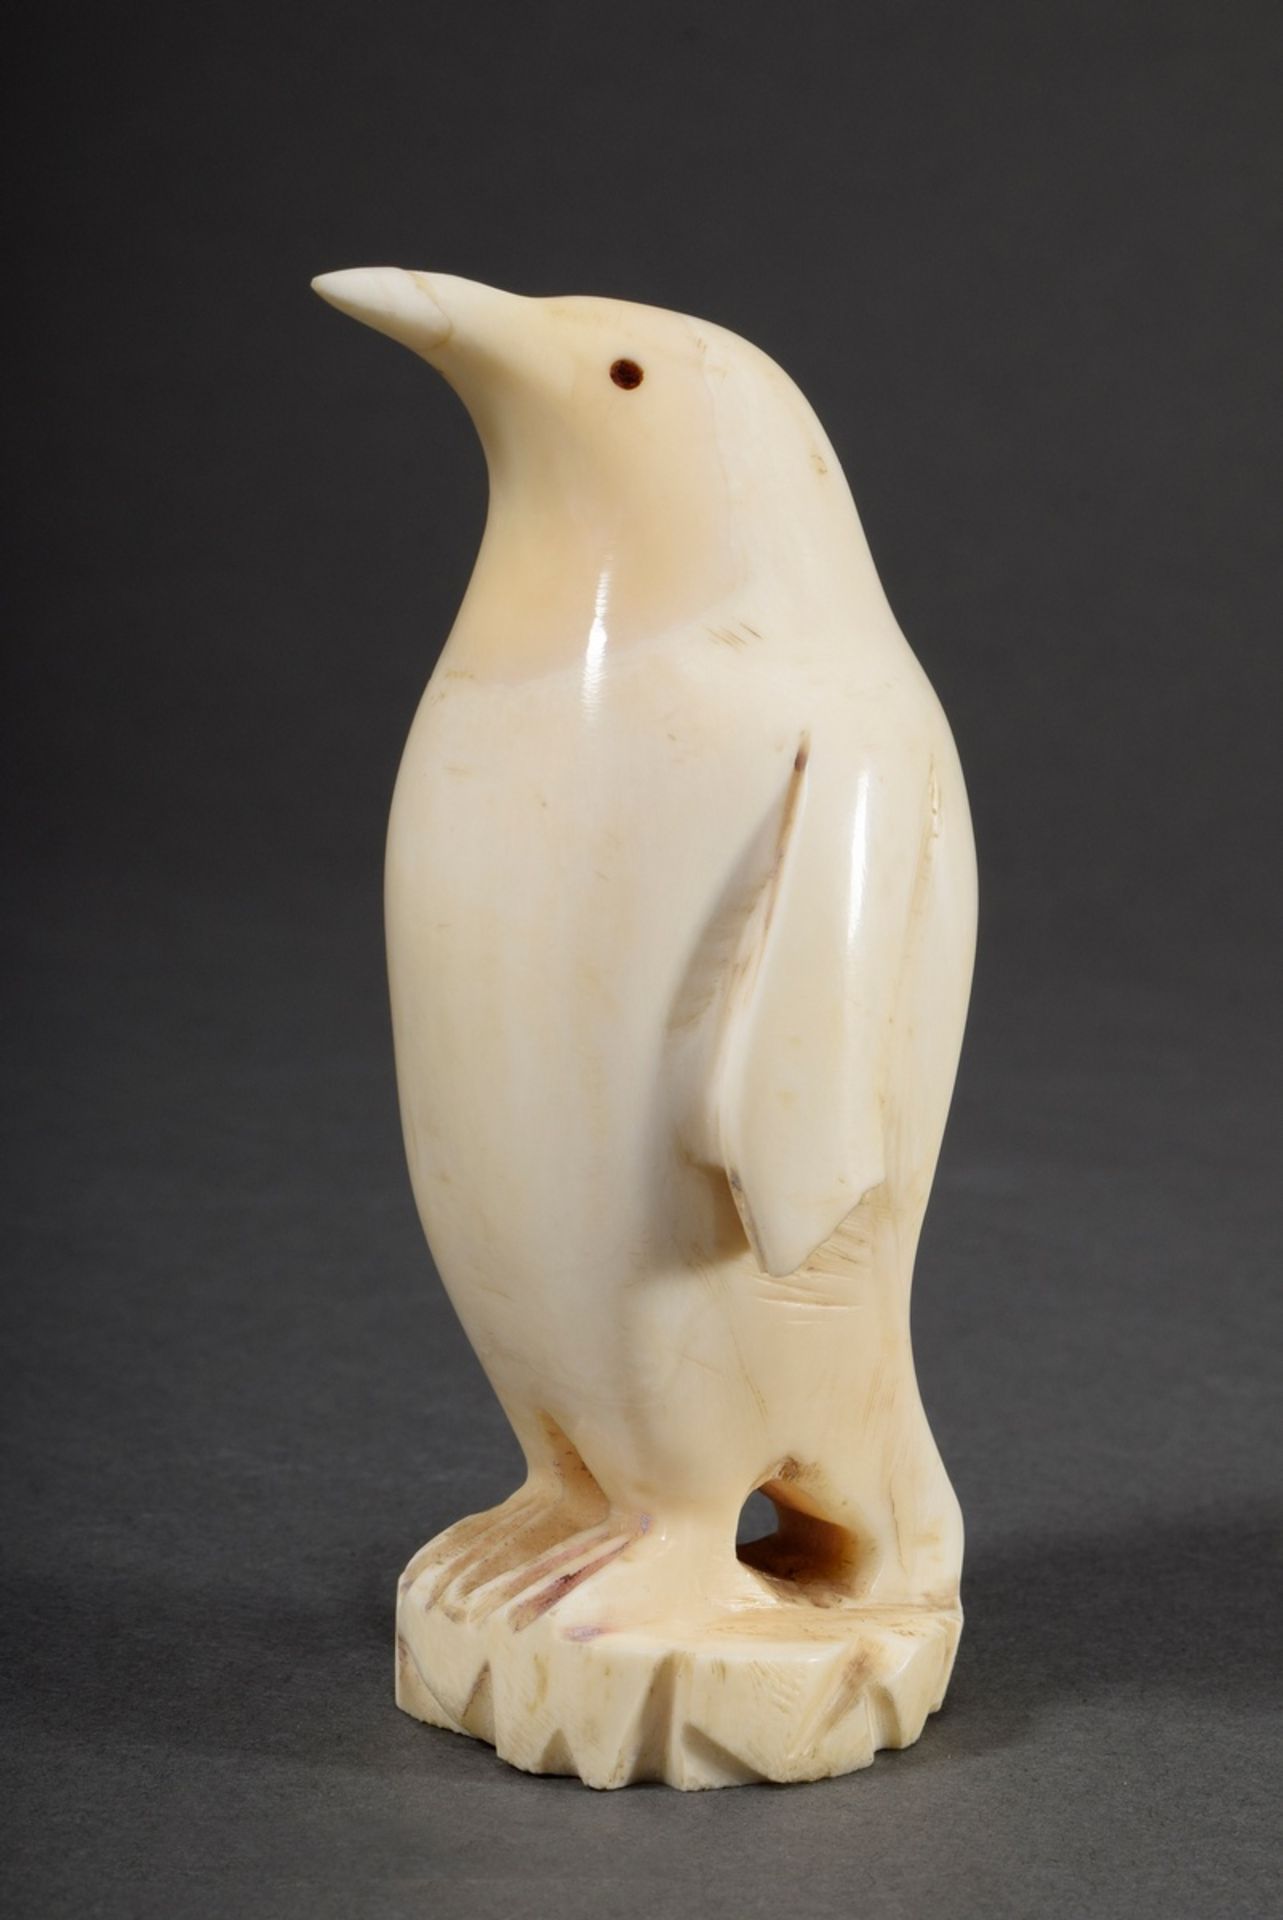 Scrimshaw "Penguin" of carved whale tooth with whale beard inlays, Inuit work, 19th c., h. 10.5cm, 